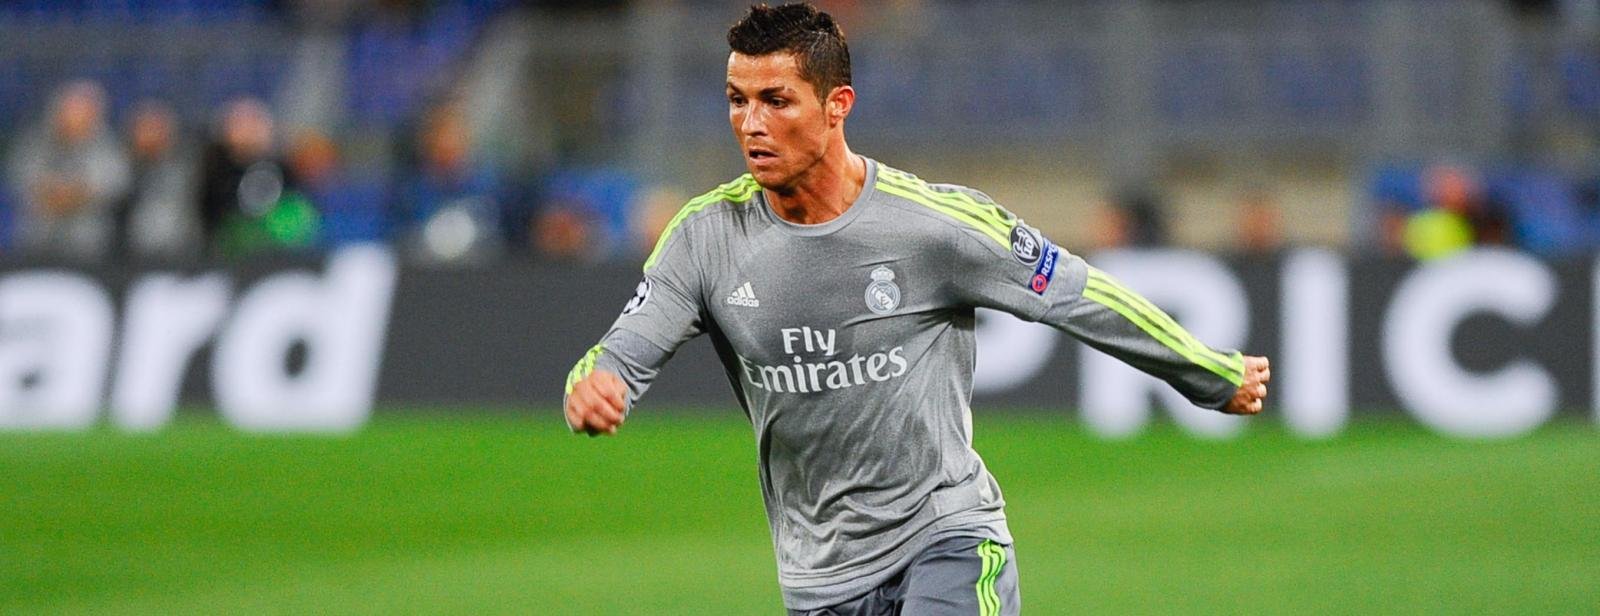 Champions League Round-Up: Ronaldo scores as Real see off Roma, while Wolfsburg win at Gent